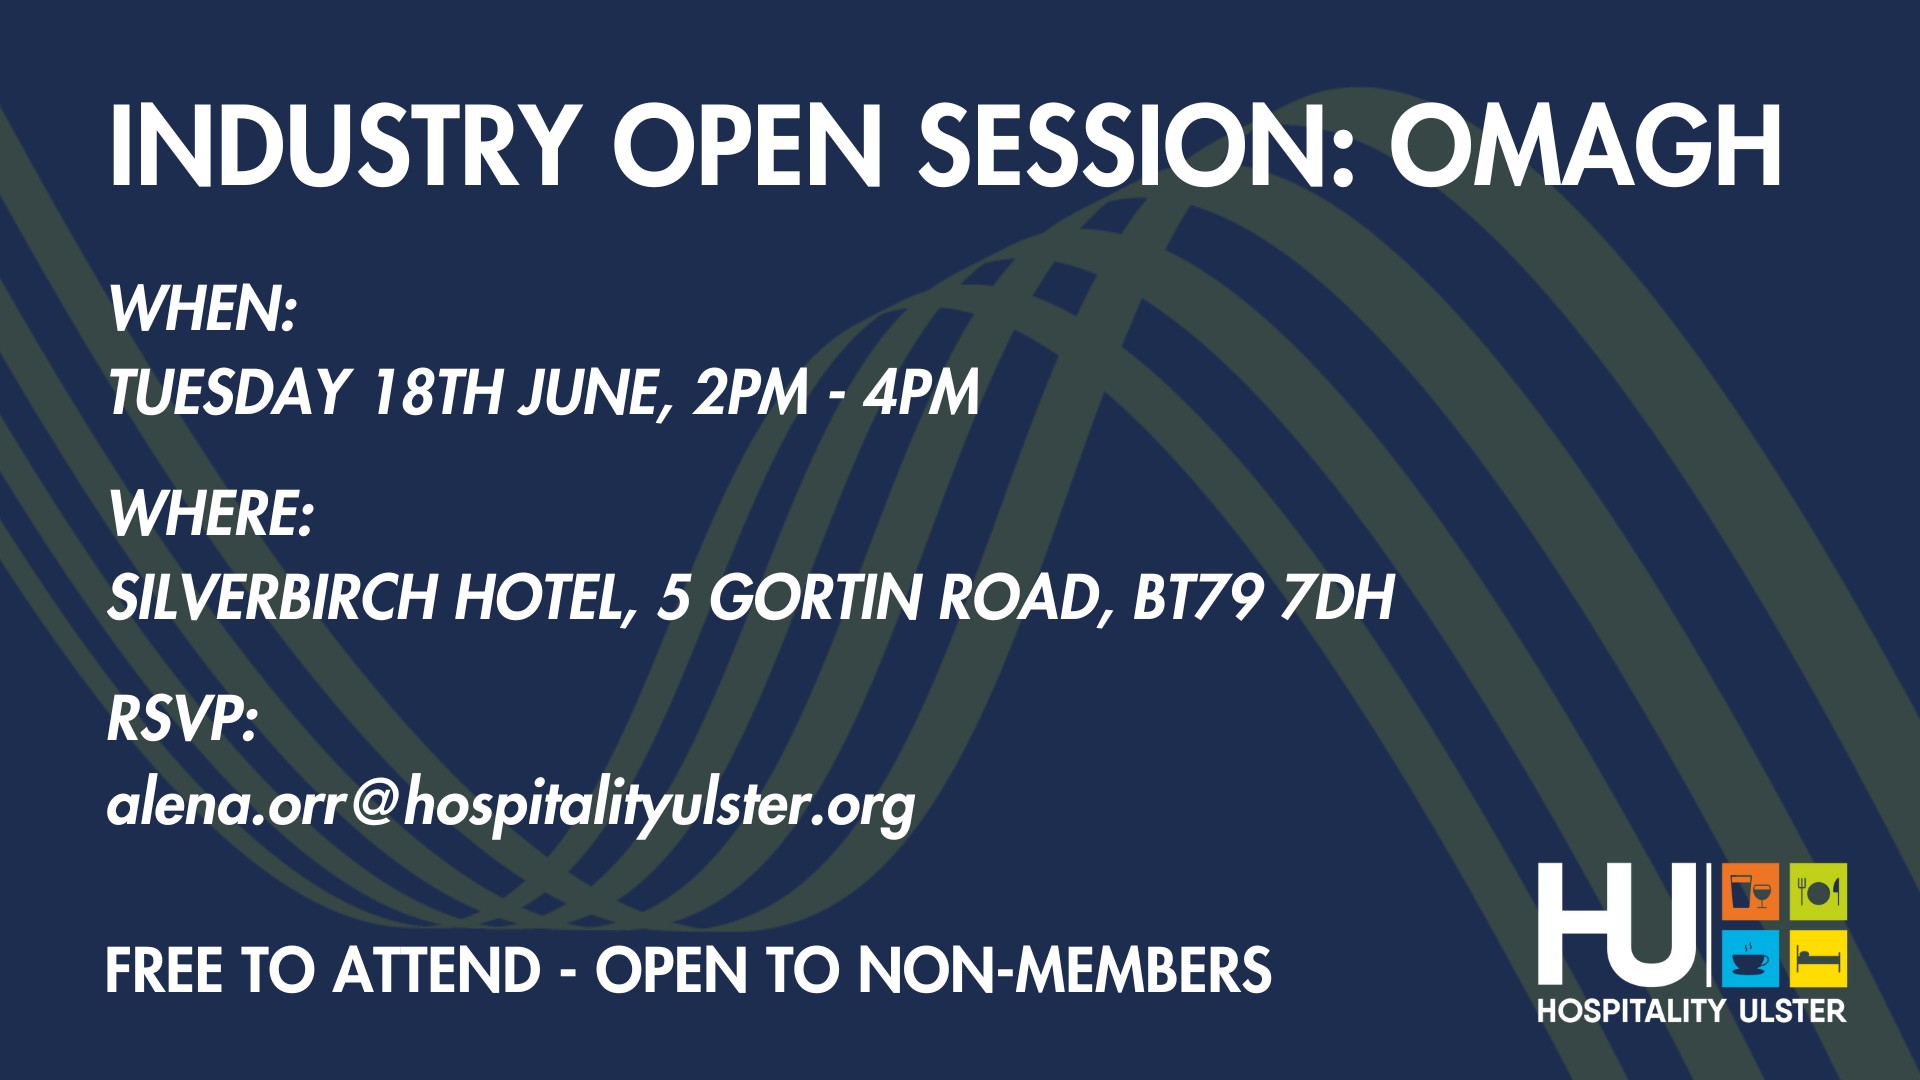 INDUSTRY OPEN SESSION  OMAGH